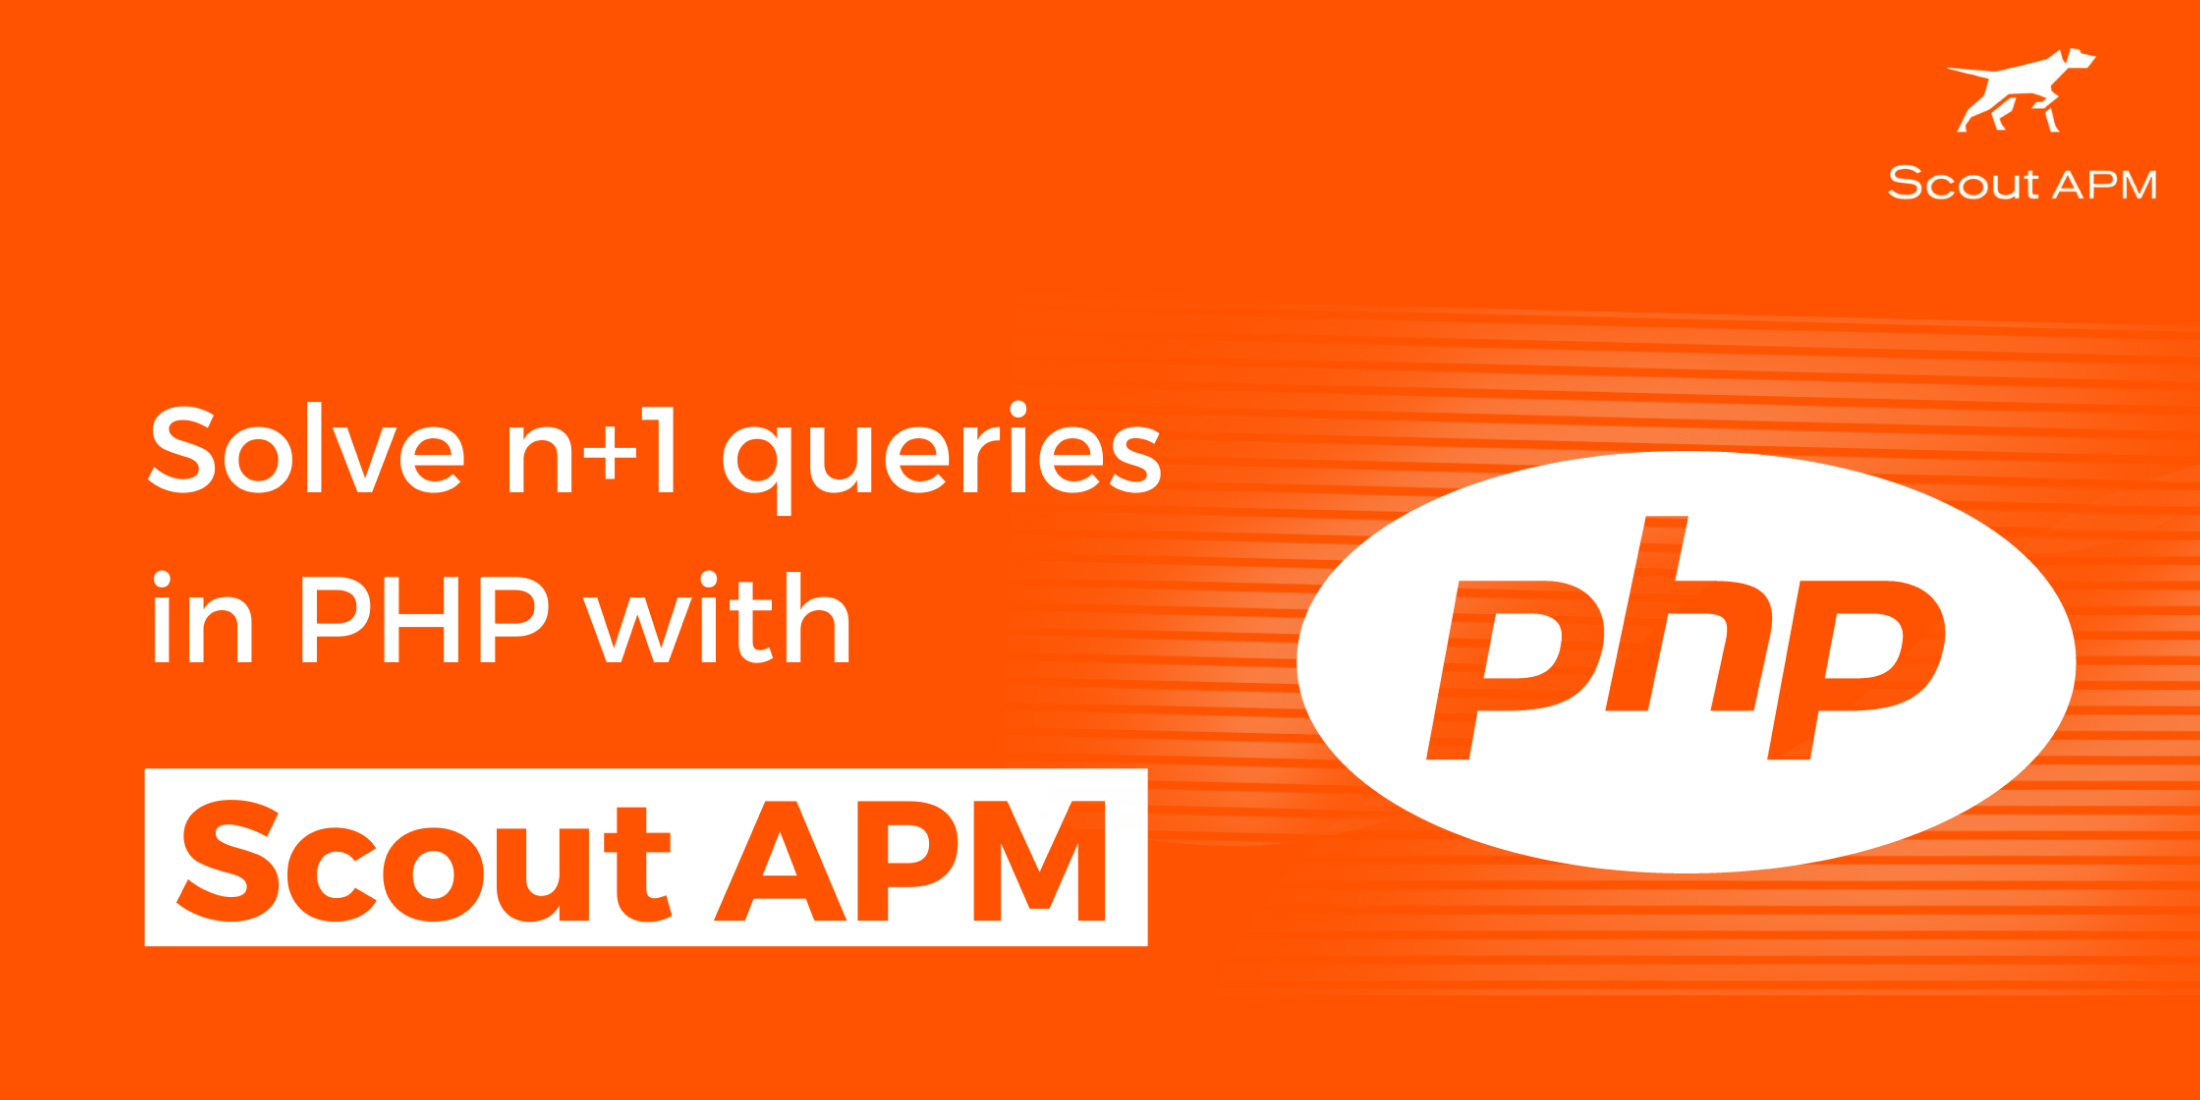 Solve n+1 queries in PHP with Scout APM